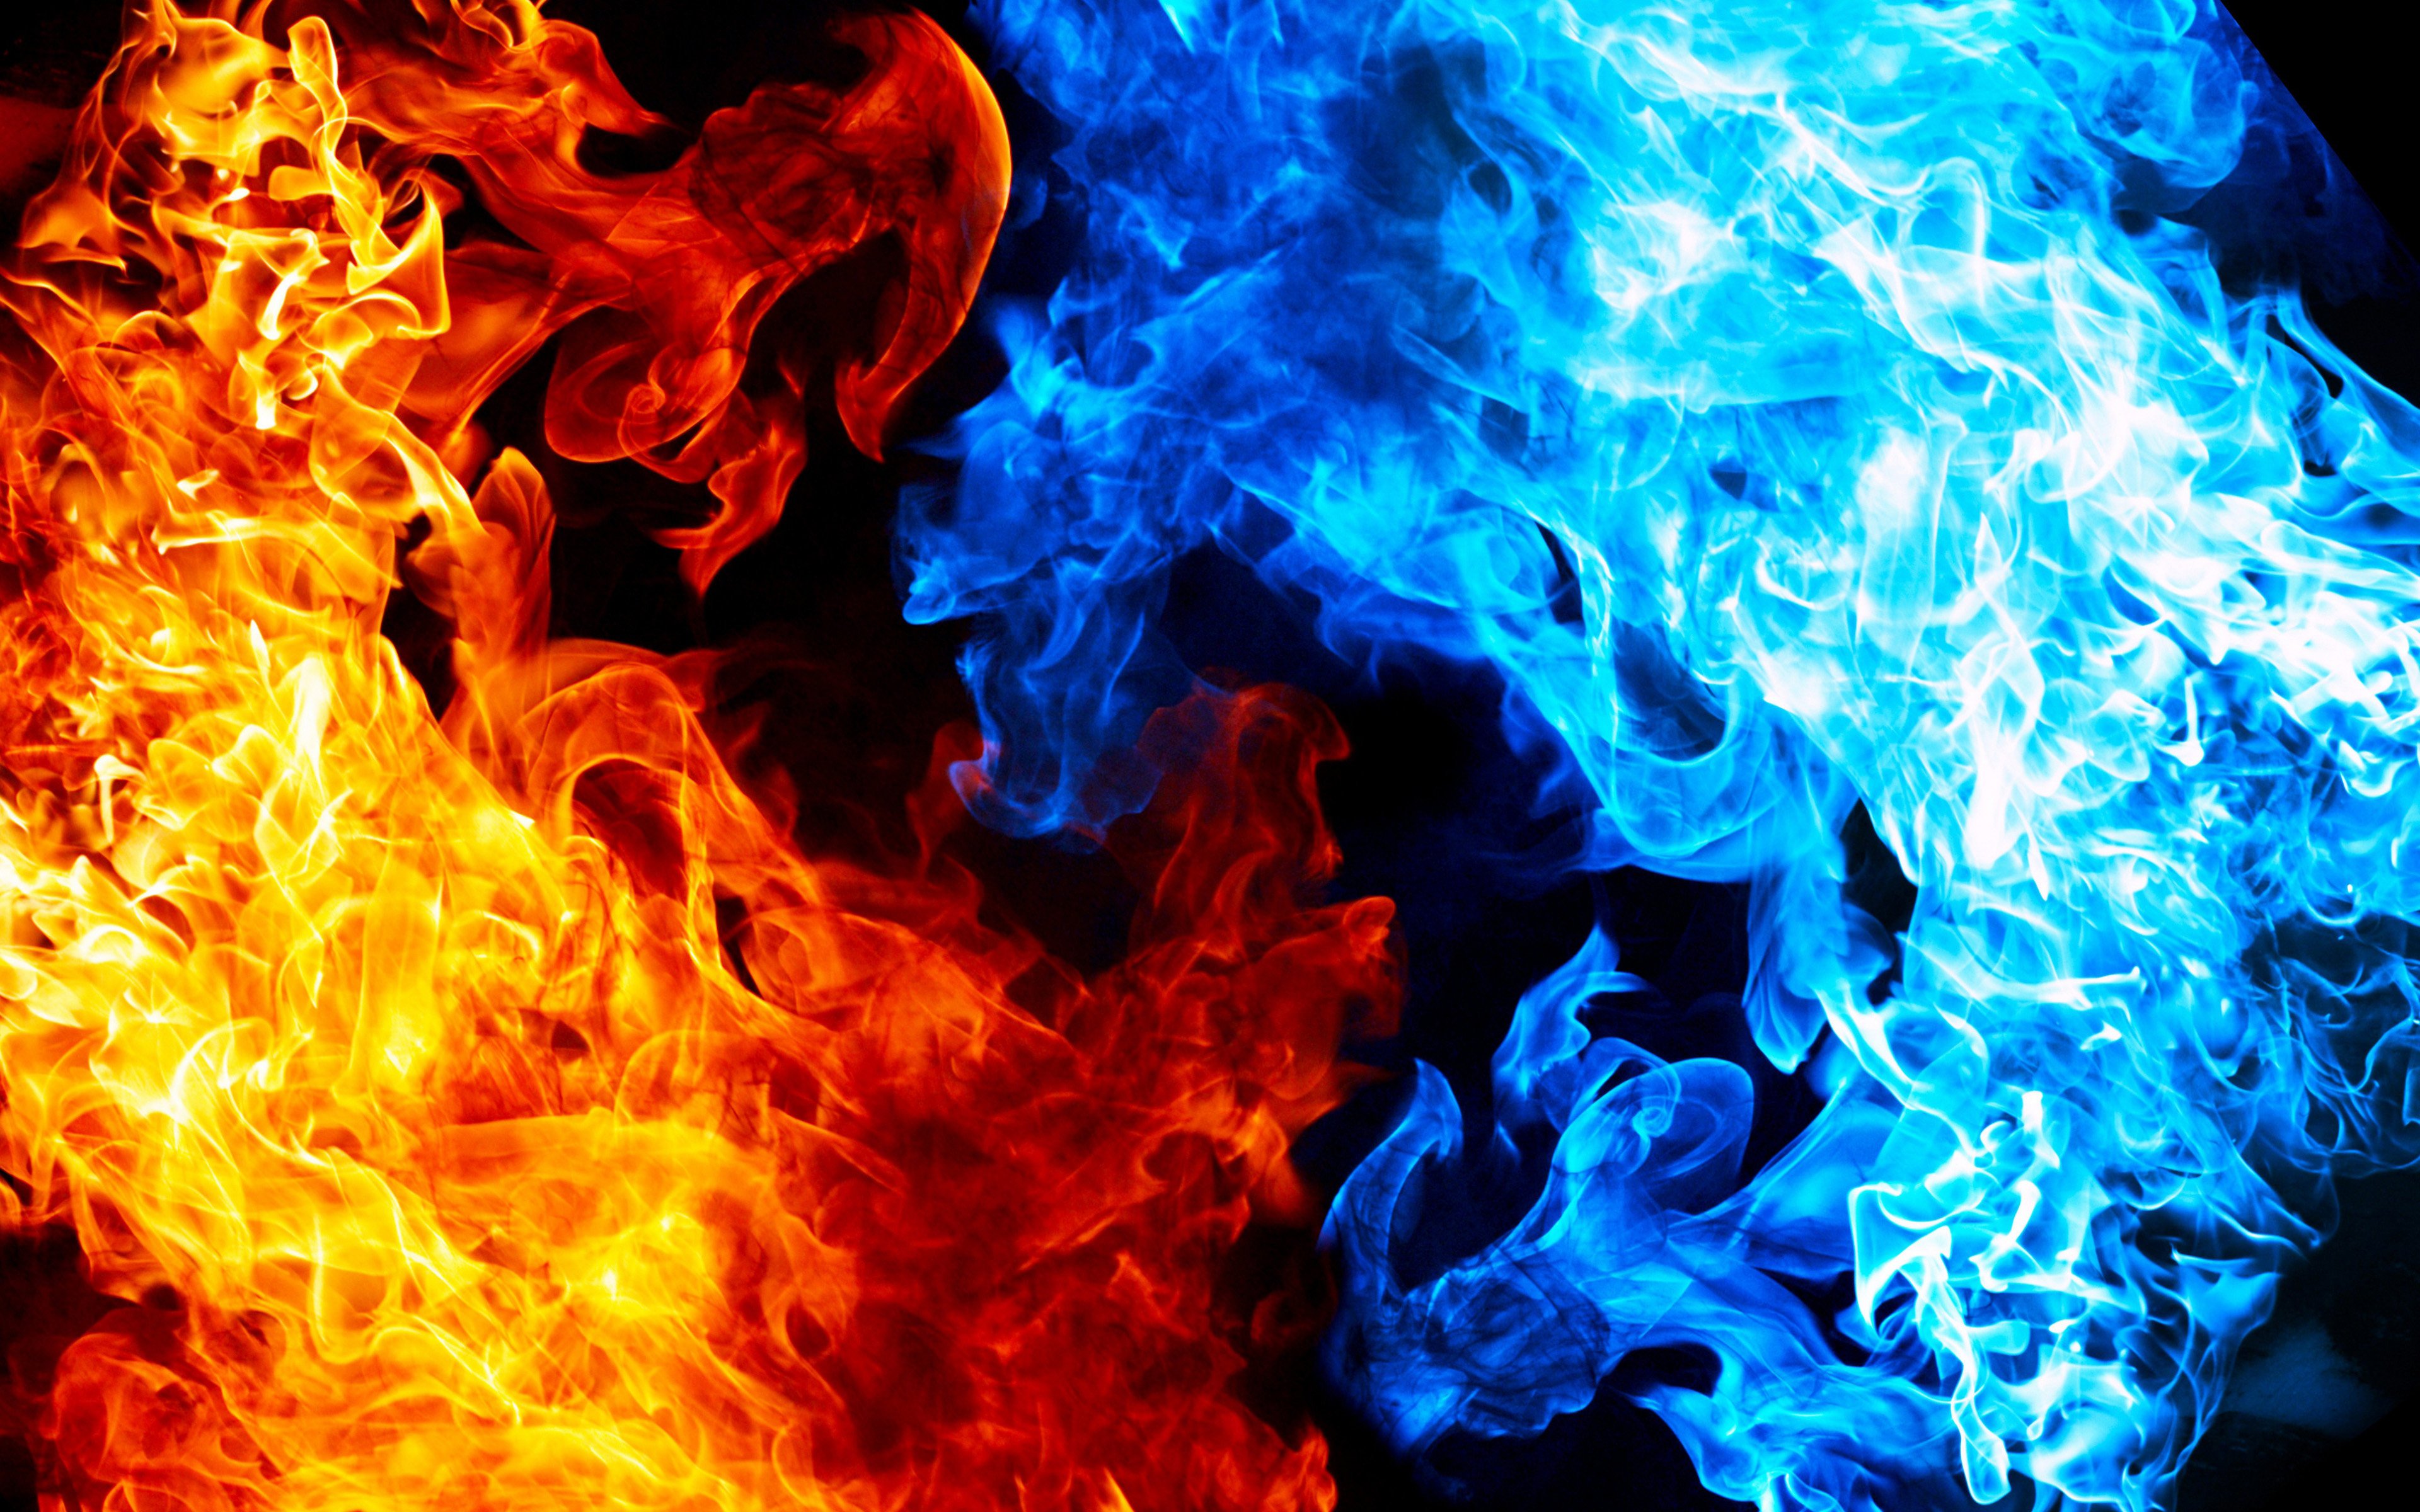 Download wallpaper blue and orange fire, macro, creative, fire flames, fire textures, artwork for desktop with resolution 3840x2400. High Quality HD picture wallpaper